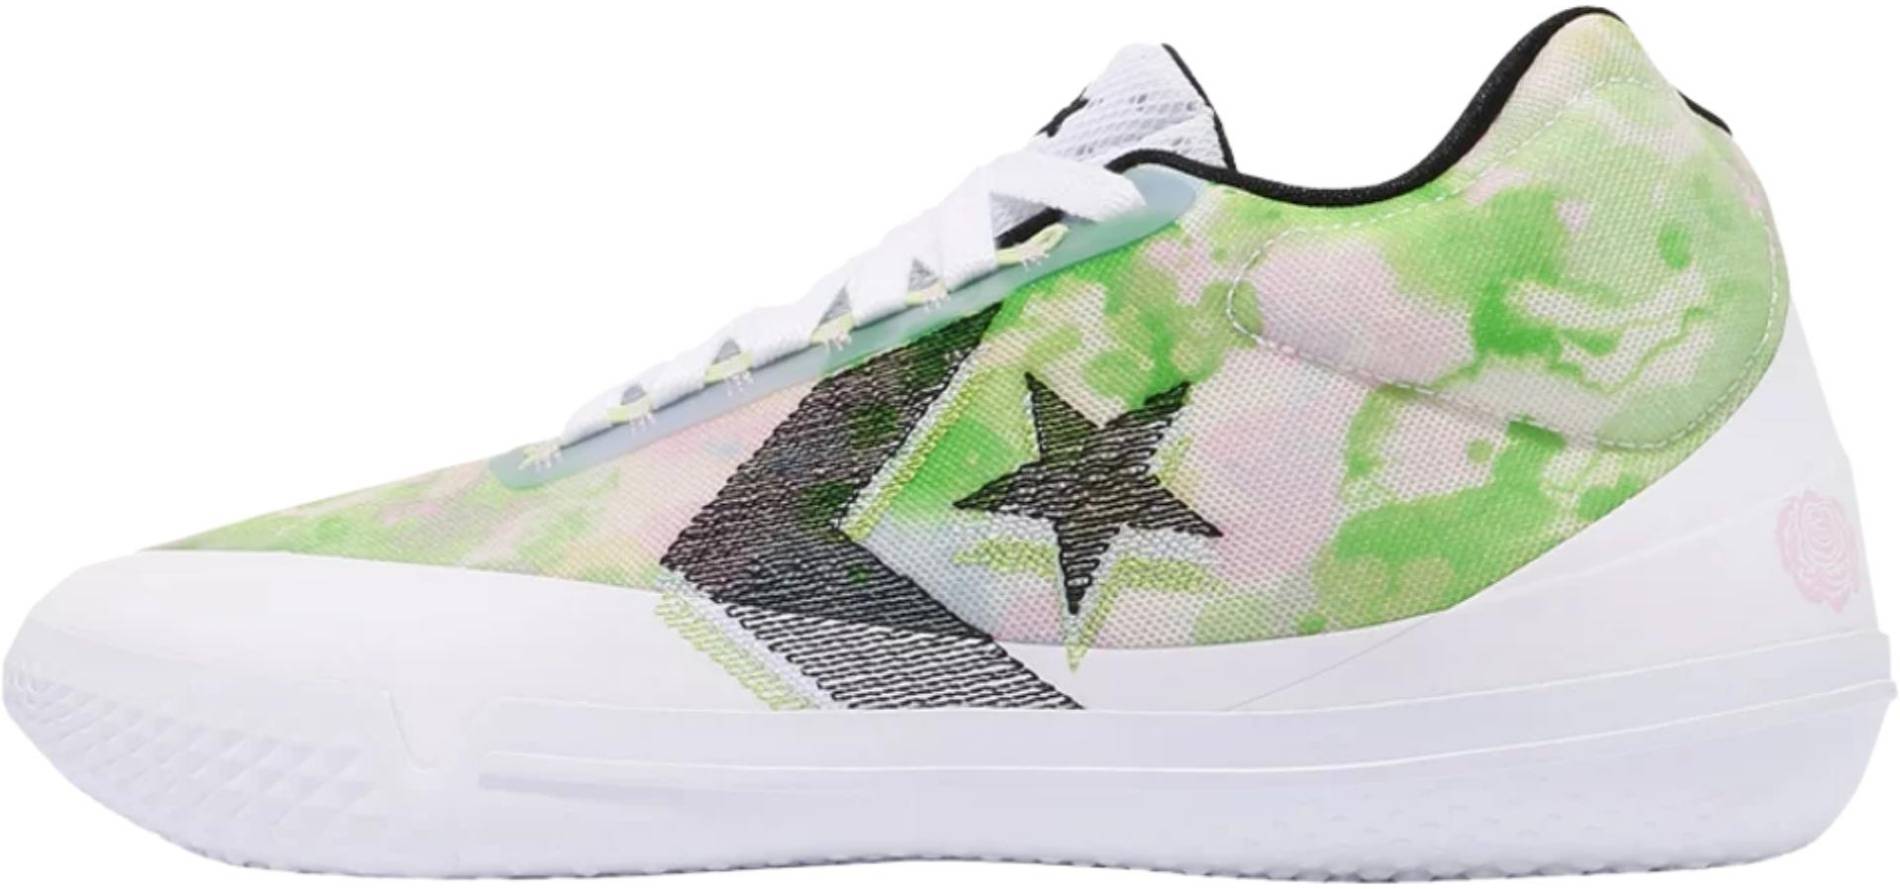 Converse All Star BB Evo sneakers (only $75) | RunRepeat